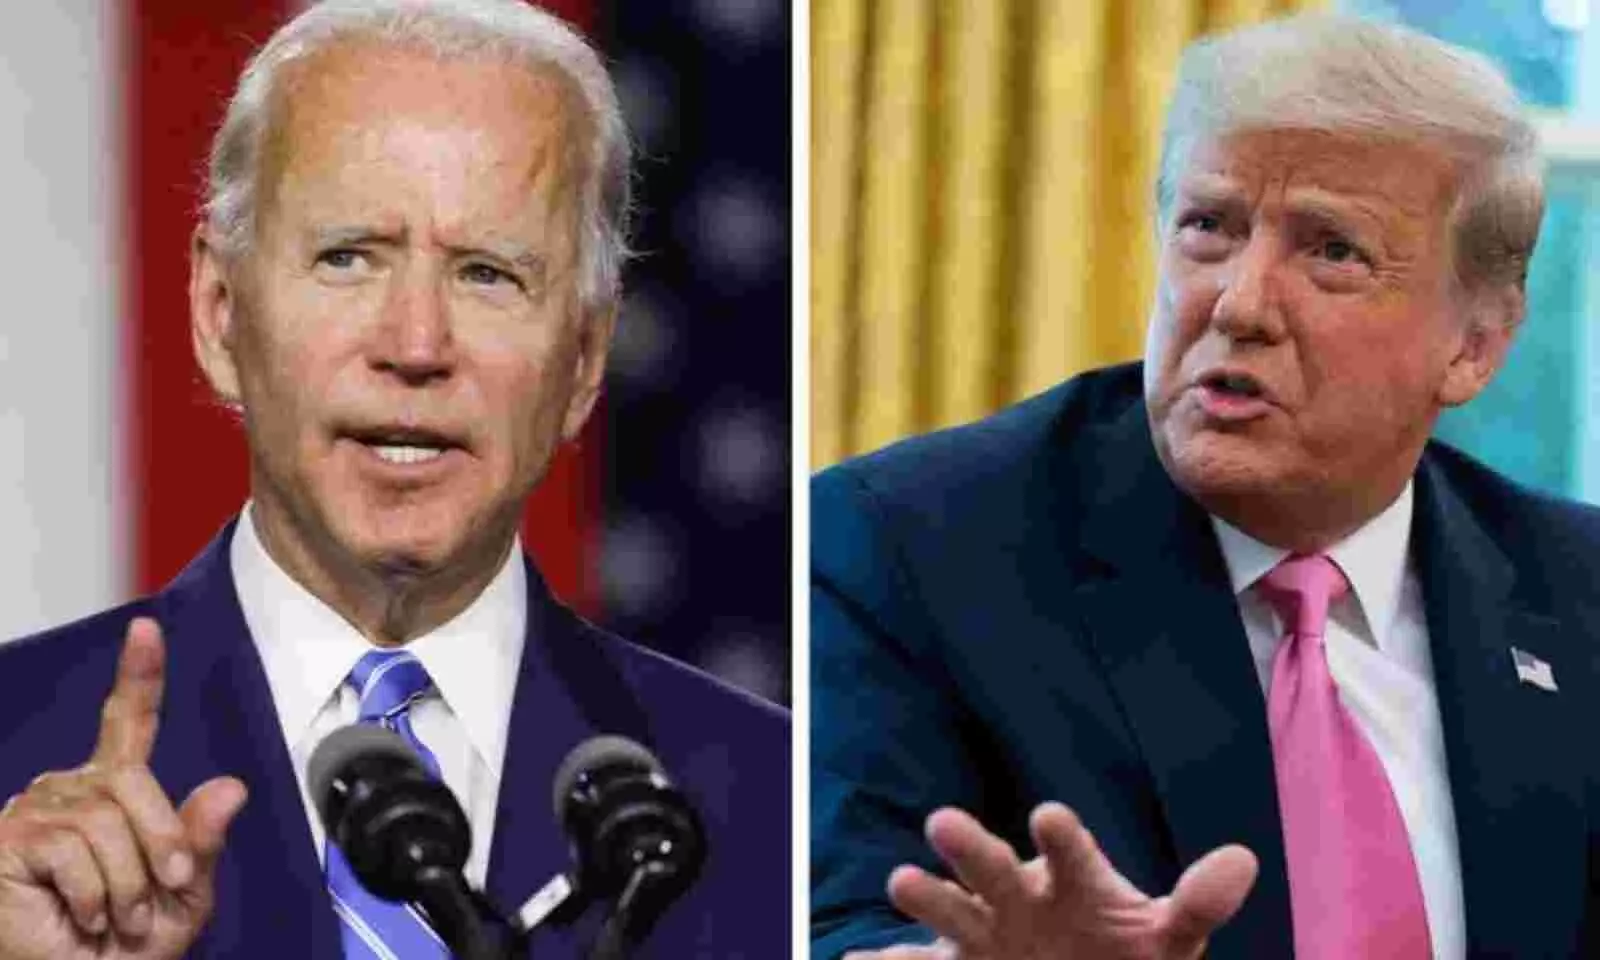 Pre-election poll favours Biden over Trump by 10 points